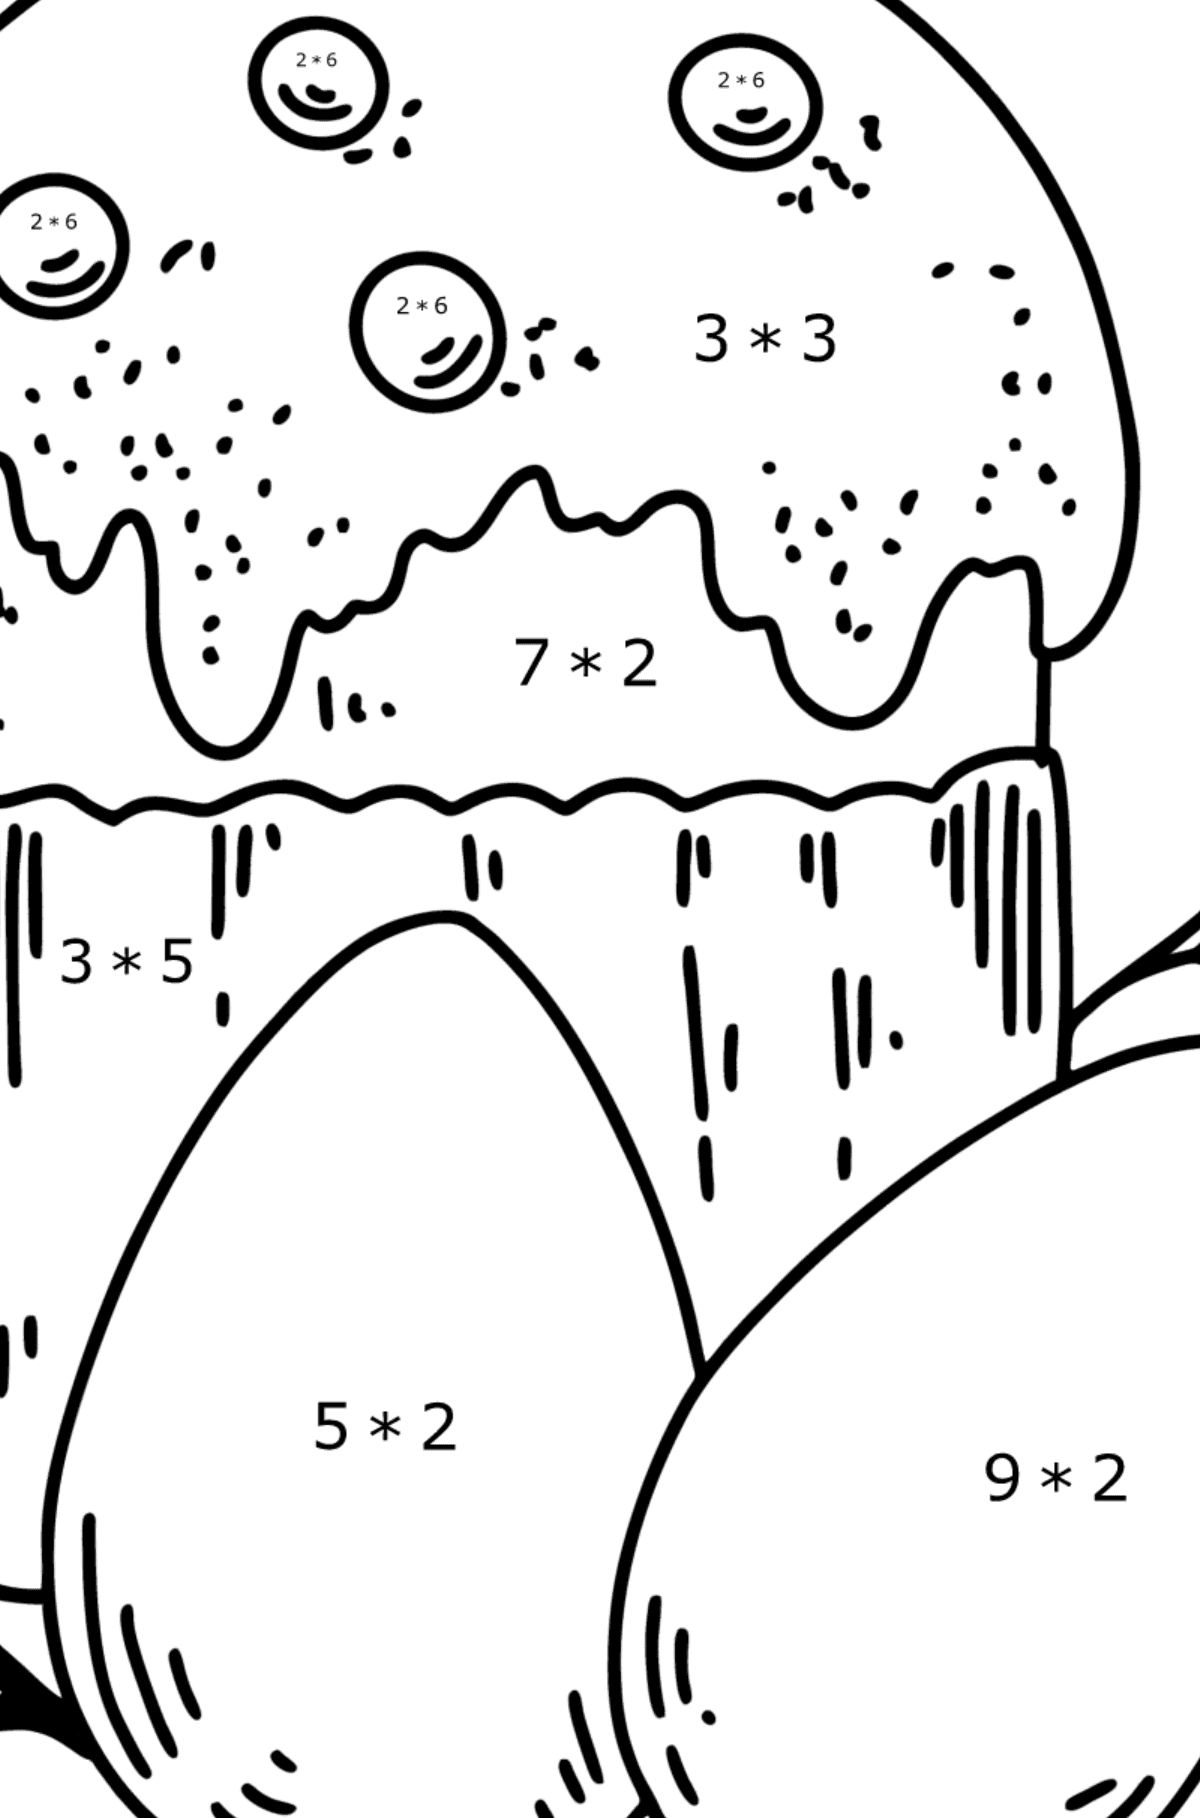 Coloring page - Easter cake and Painted Eggs - Math Coloring - Multiplication for Kids